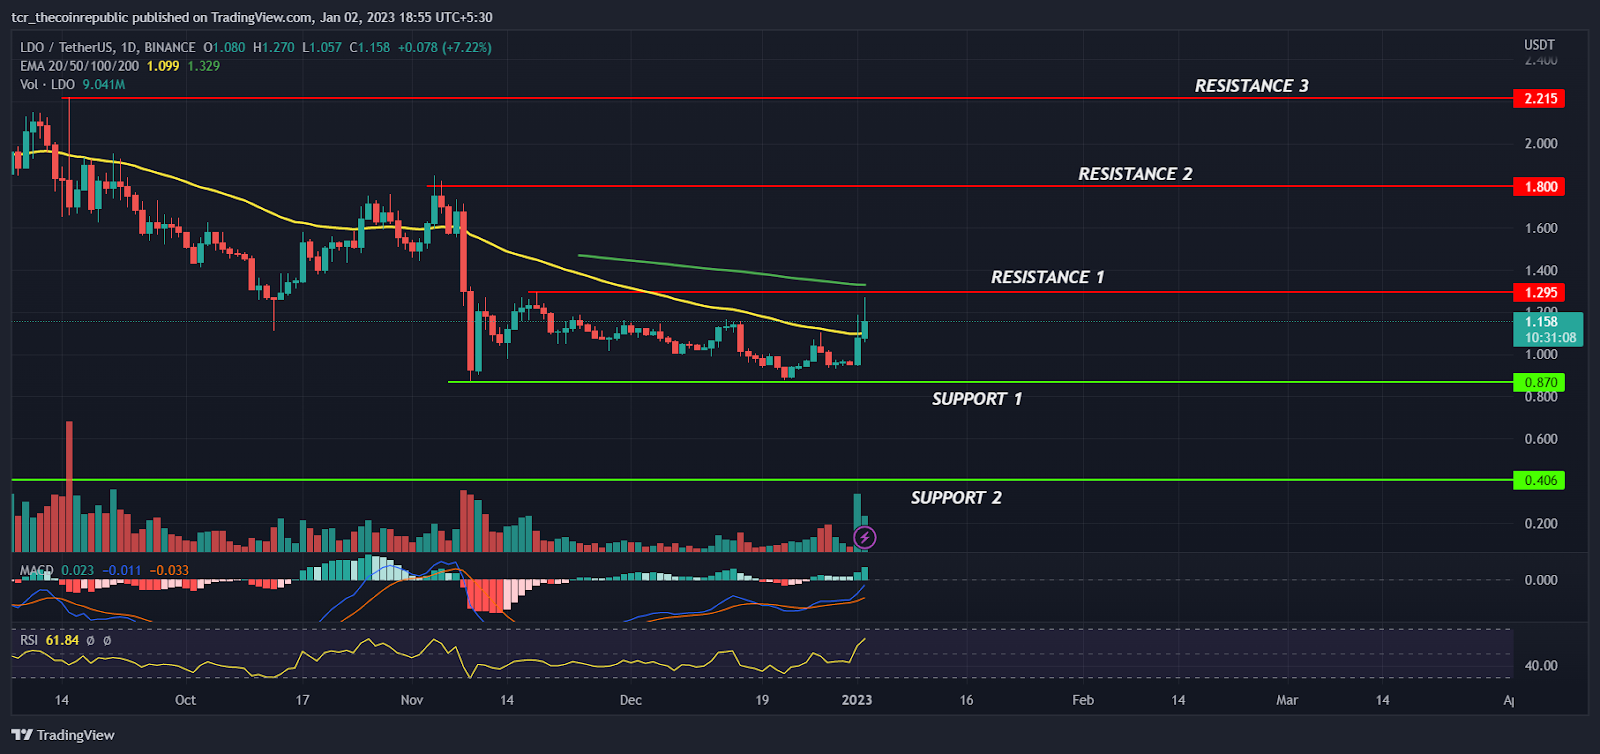  FXS/USD 4-hour price chart. Source: TradingView